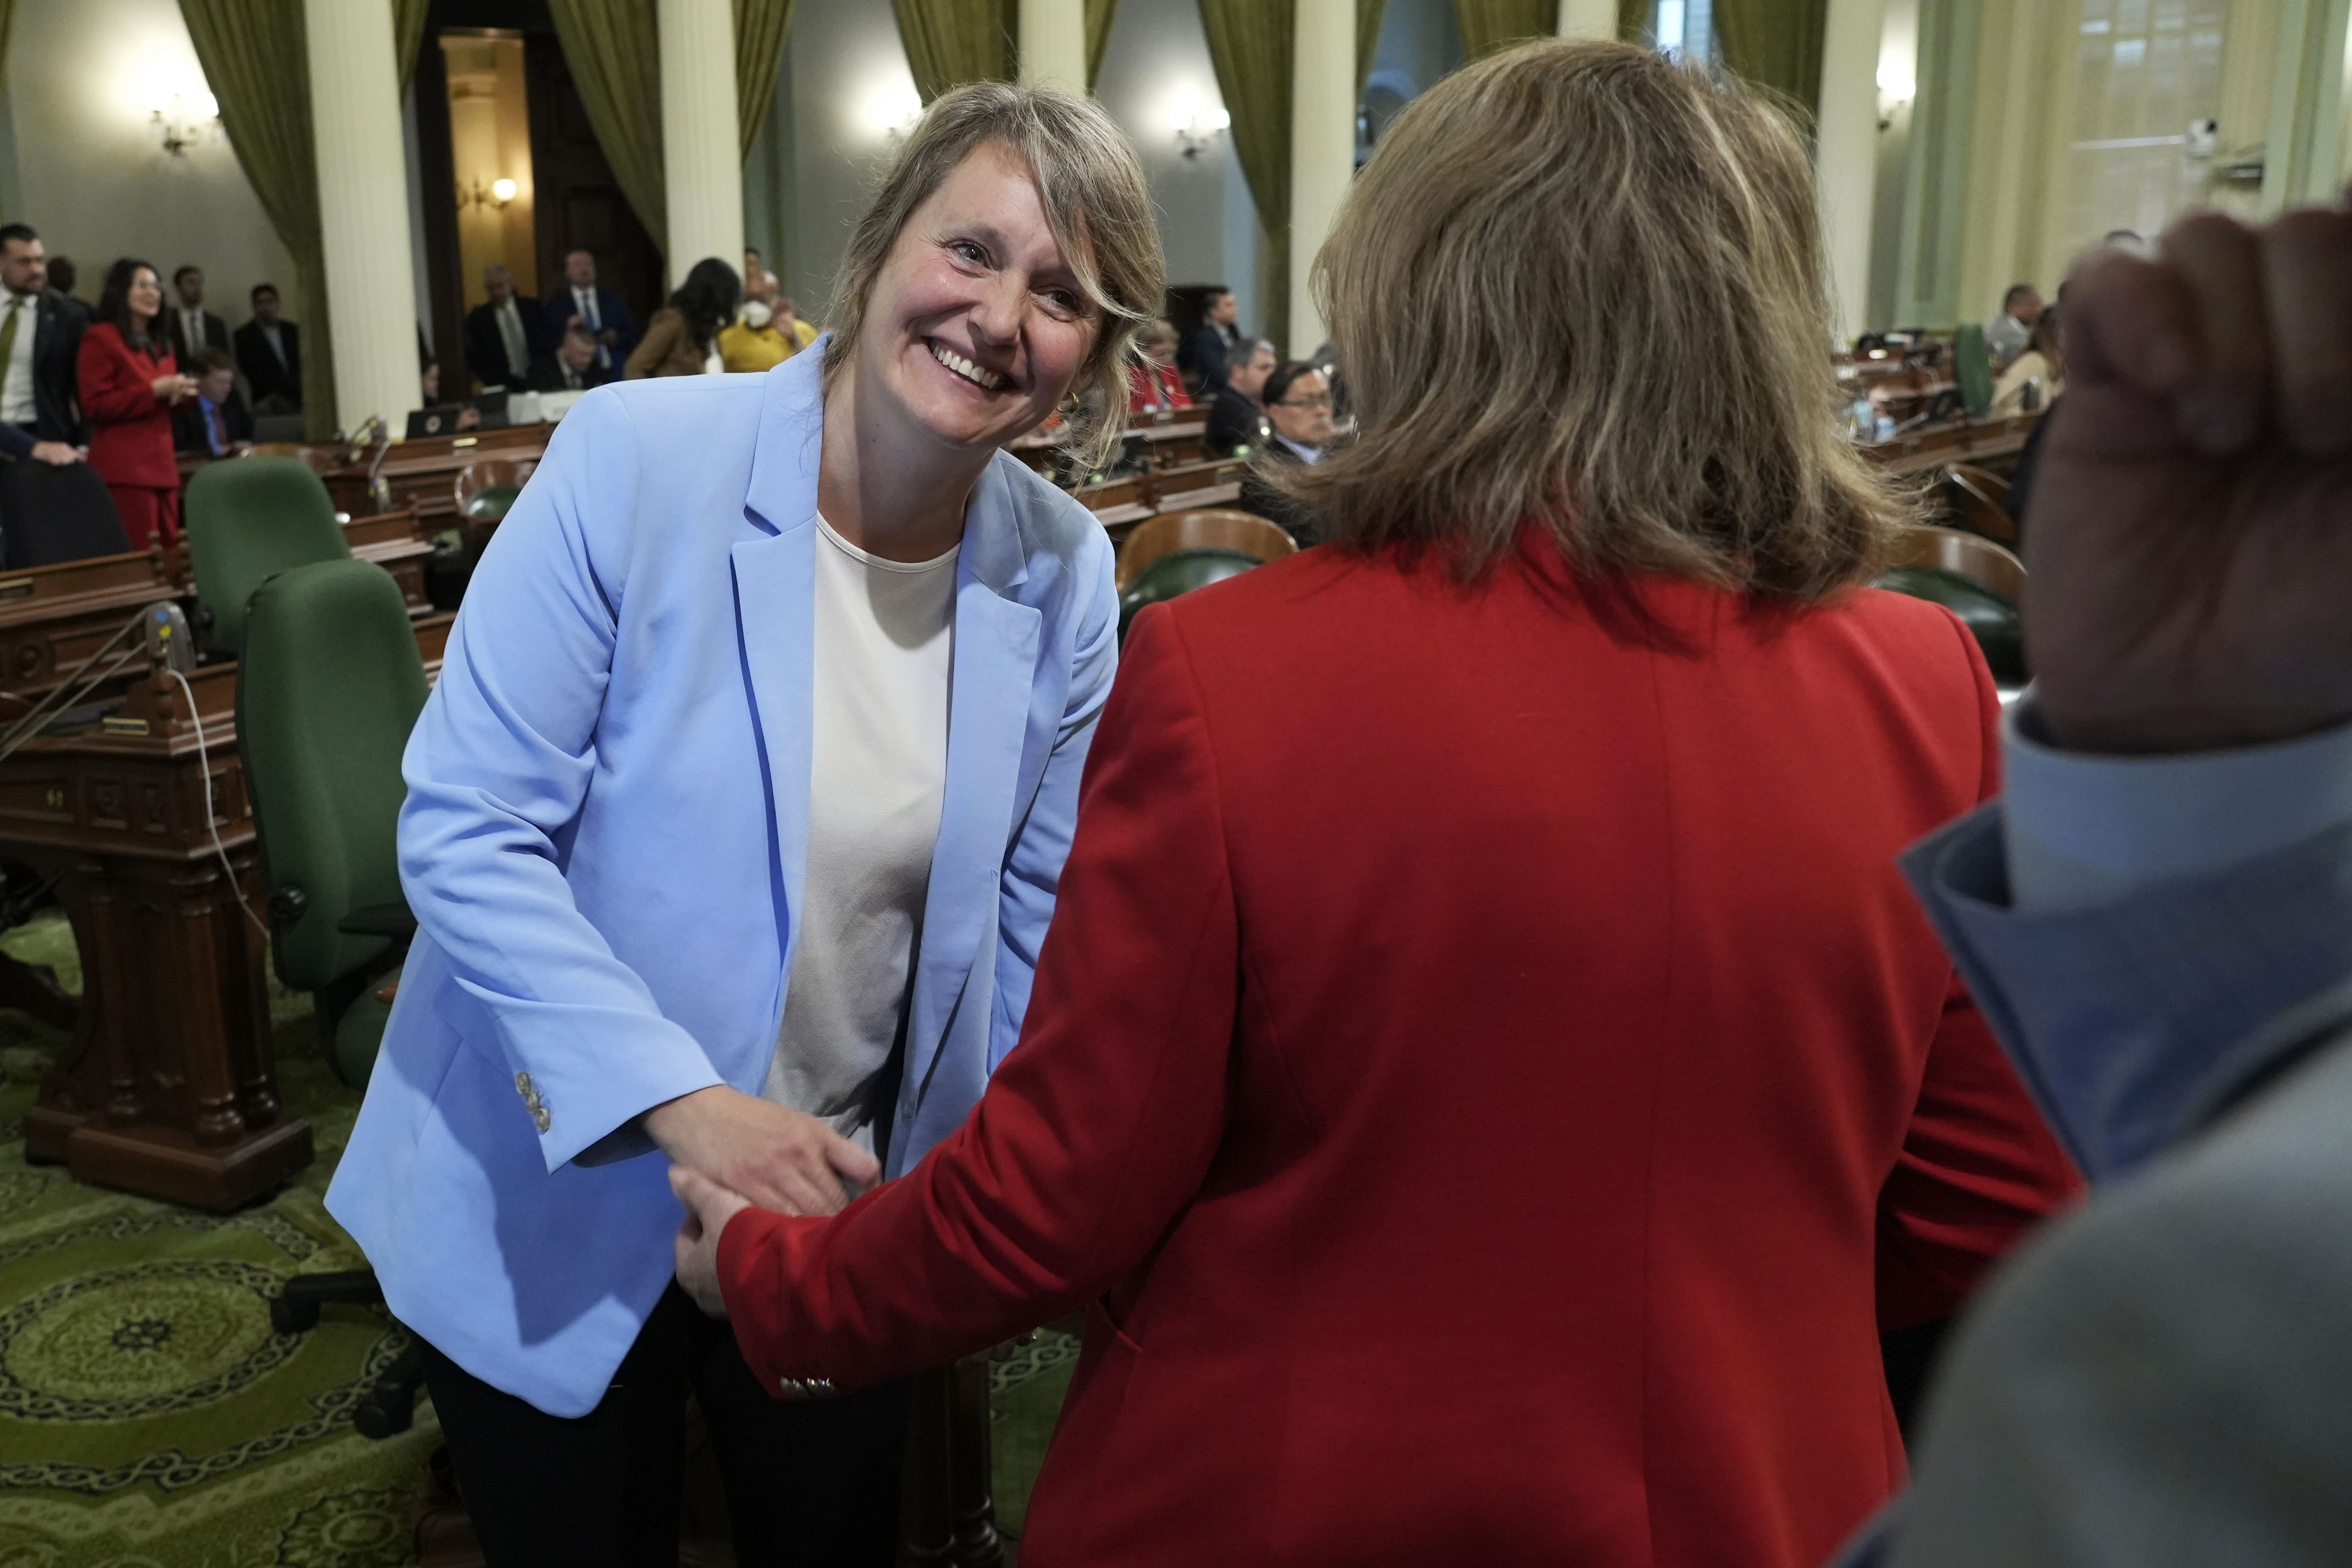 Assemblywoman Buffy Wicks, left, D-Oakland, is congratulated by Assemblywoman Eloise Gomez Reyes, D-Colton, after Wicks' measure that would force Big Tech companies to pay media outlets for using their news content was approved by the Assembly at the Capitol in Sacramento, Calif., Thursday, June 1, 2023. The measure now goes to the Senate for consideration. (AP Photo/Rich Pedroncelli)